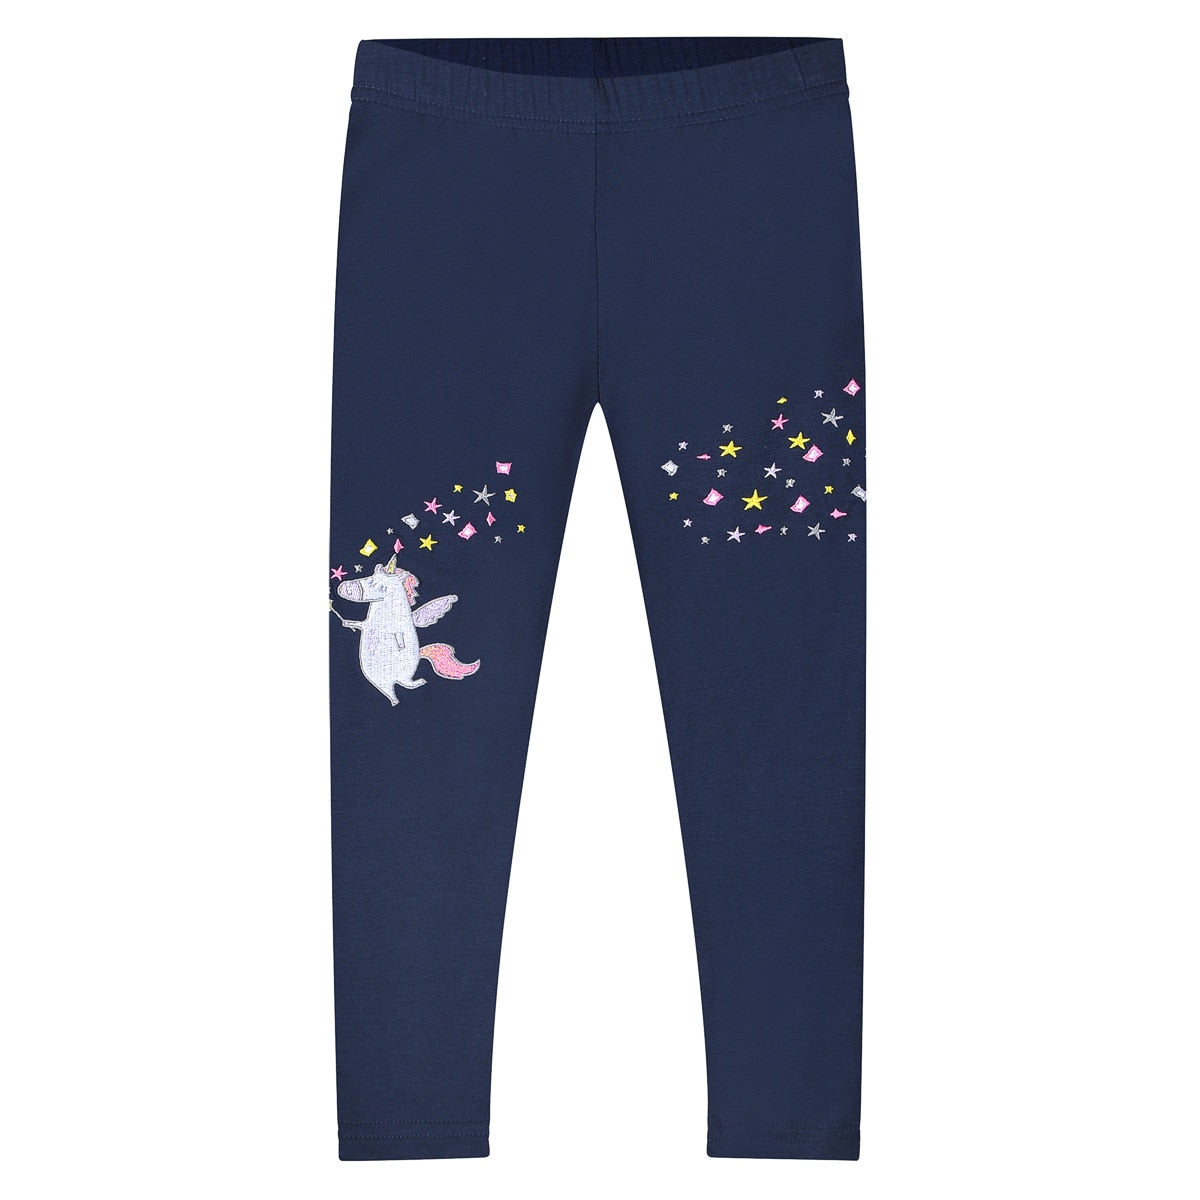 Soft and Comfortable Cotton Leggings for Girls - Purple, Navy, Dark Blue